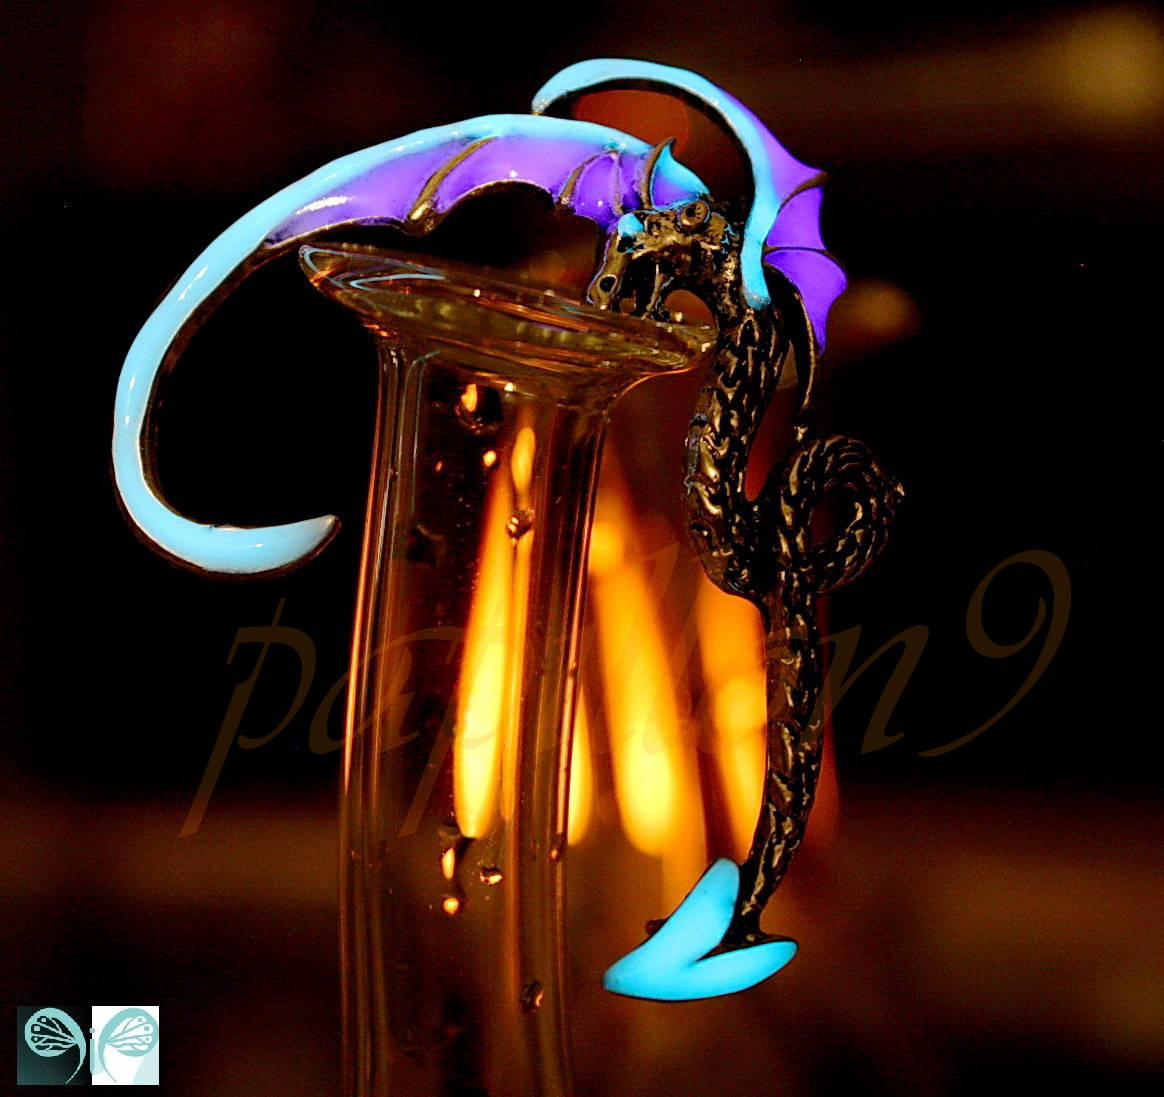 The Whispering Dragon Glow In The Dark Handcrafted Ear Cuff